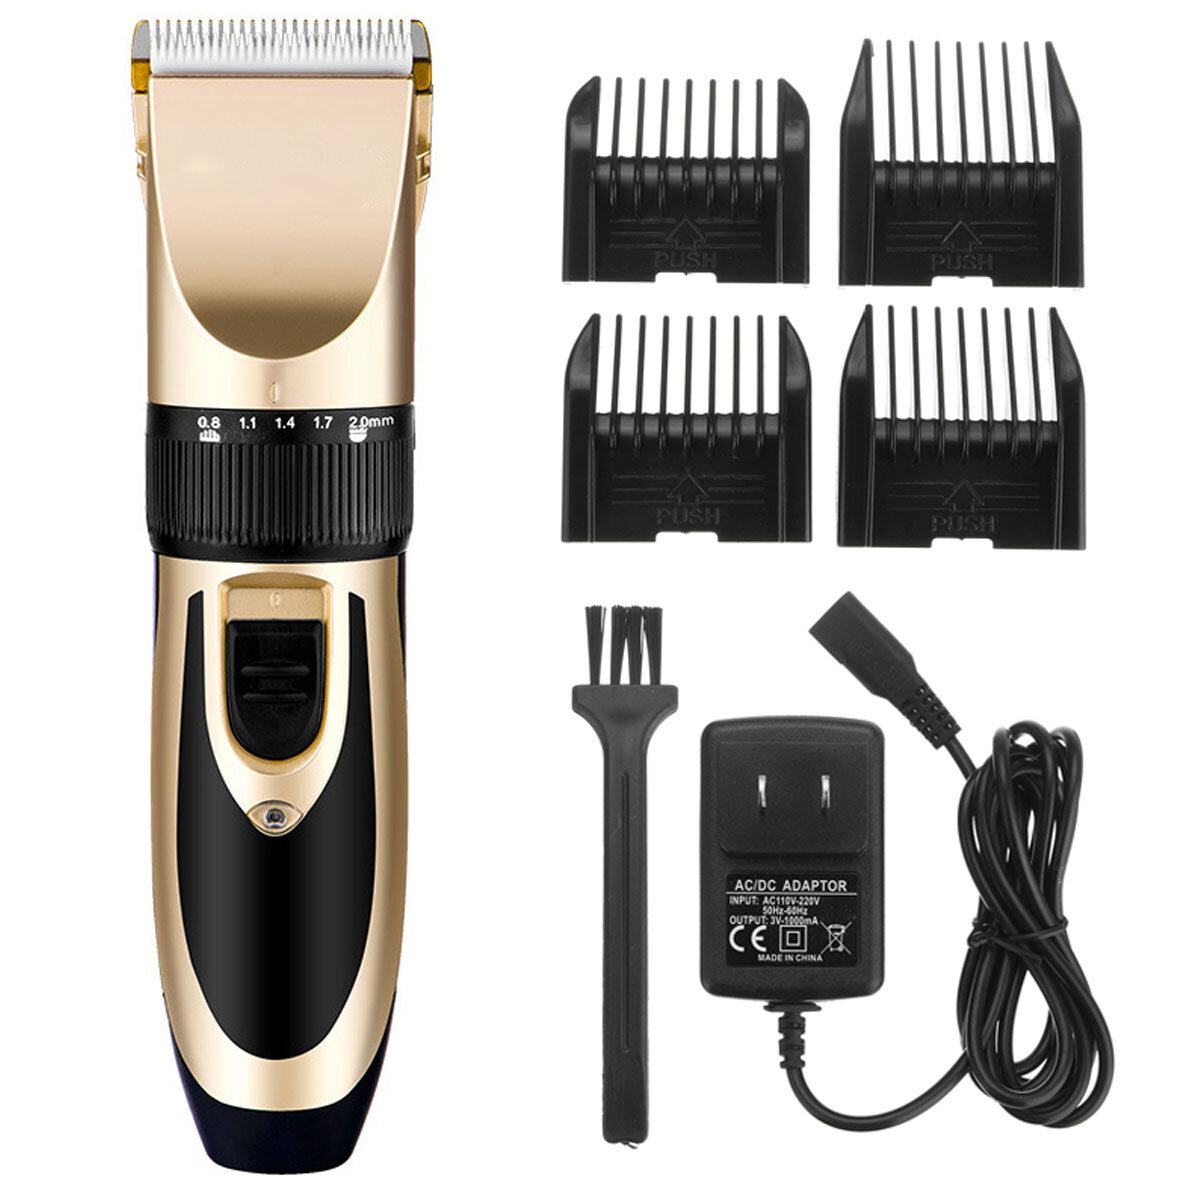 Y.F.M® Rechargeable Men Electric Hair Clipper Trimmer Beard Shaver 110-240V Haircut Ceramic...